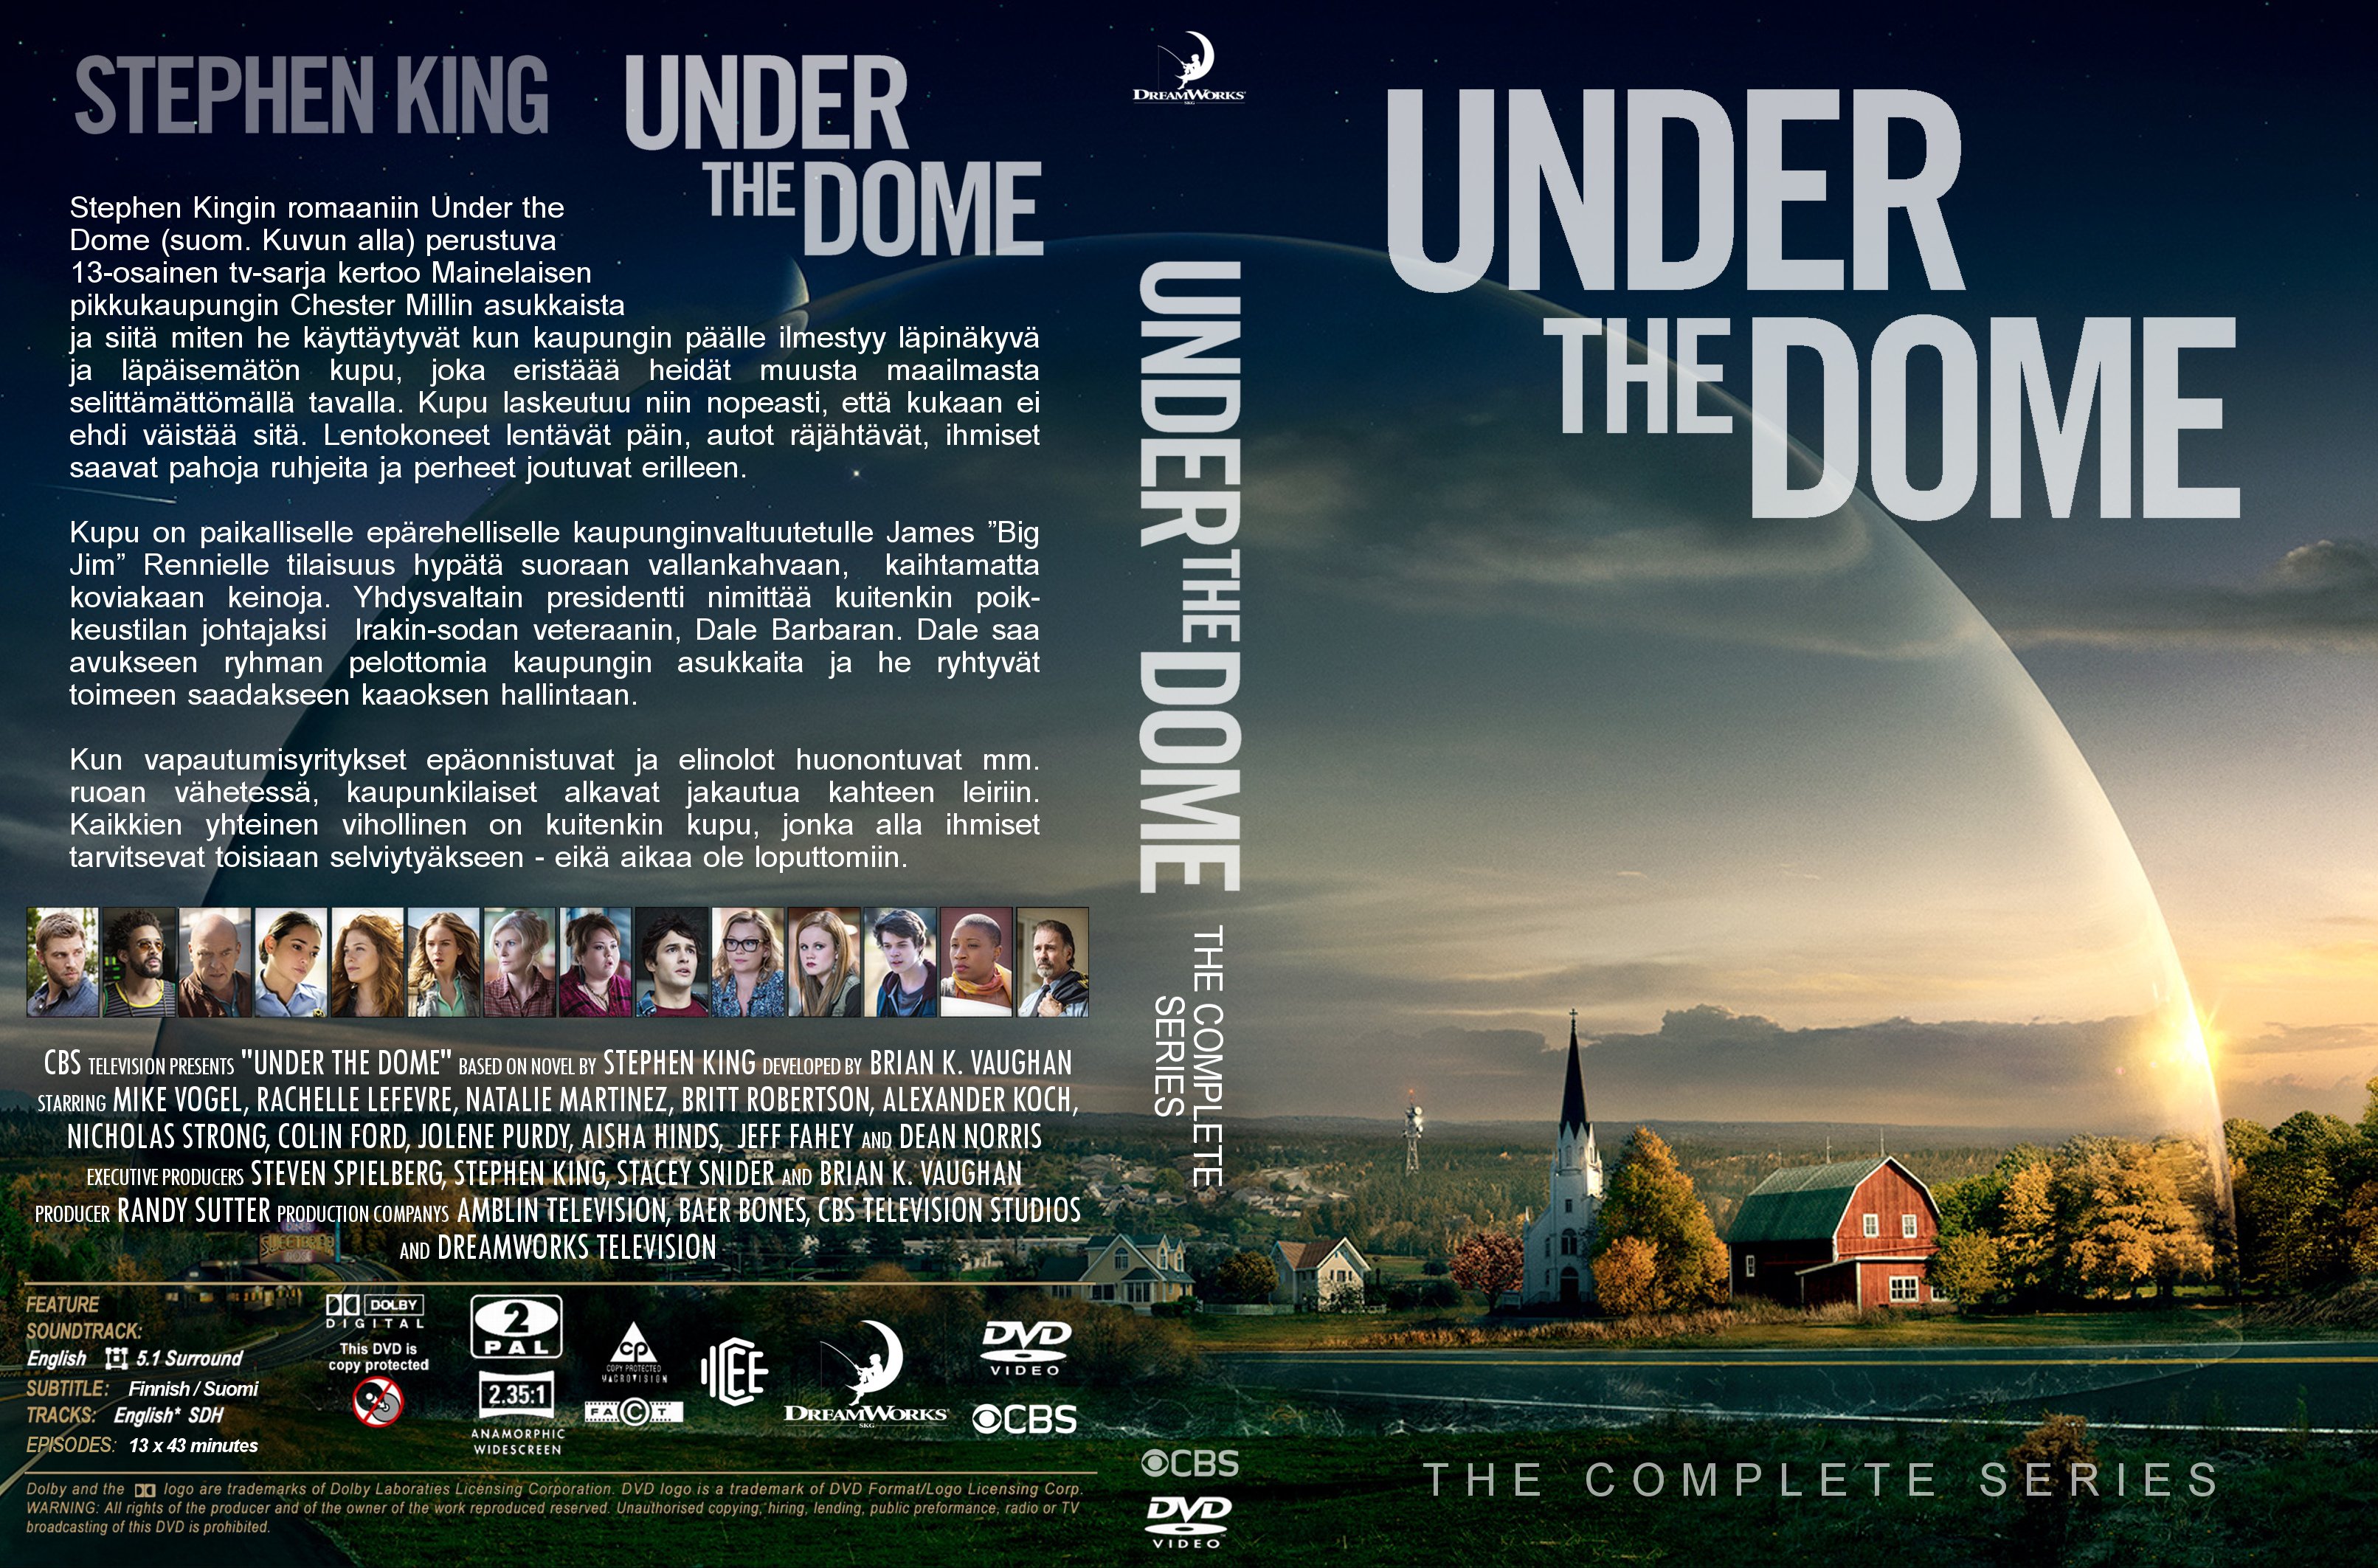 under, The, Dome, Drama, Mystery, Thriller, Sci fi, Series, Horror,  10 Wallpaper